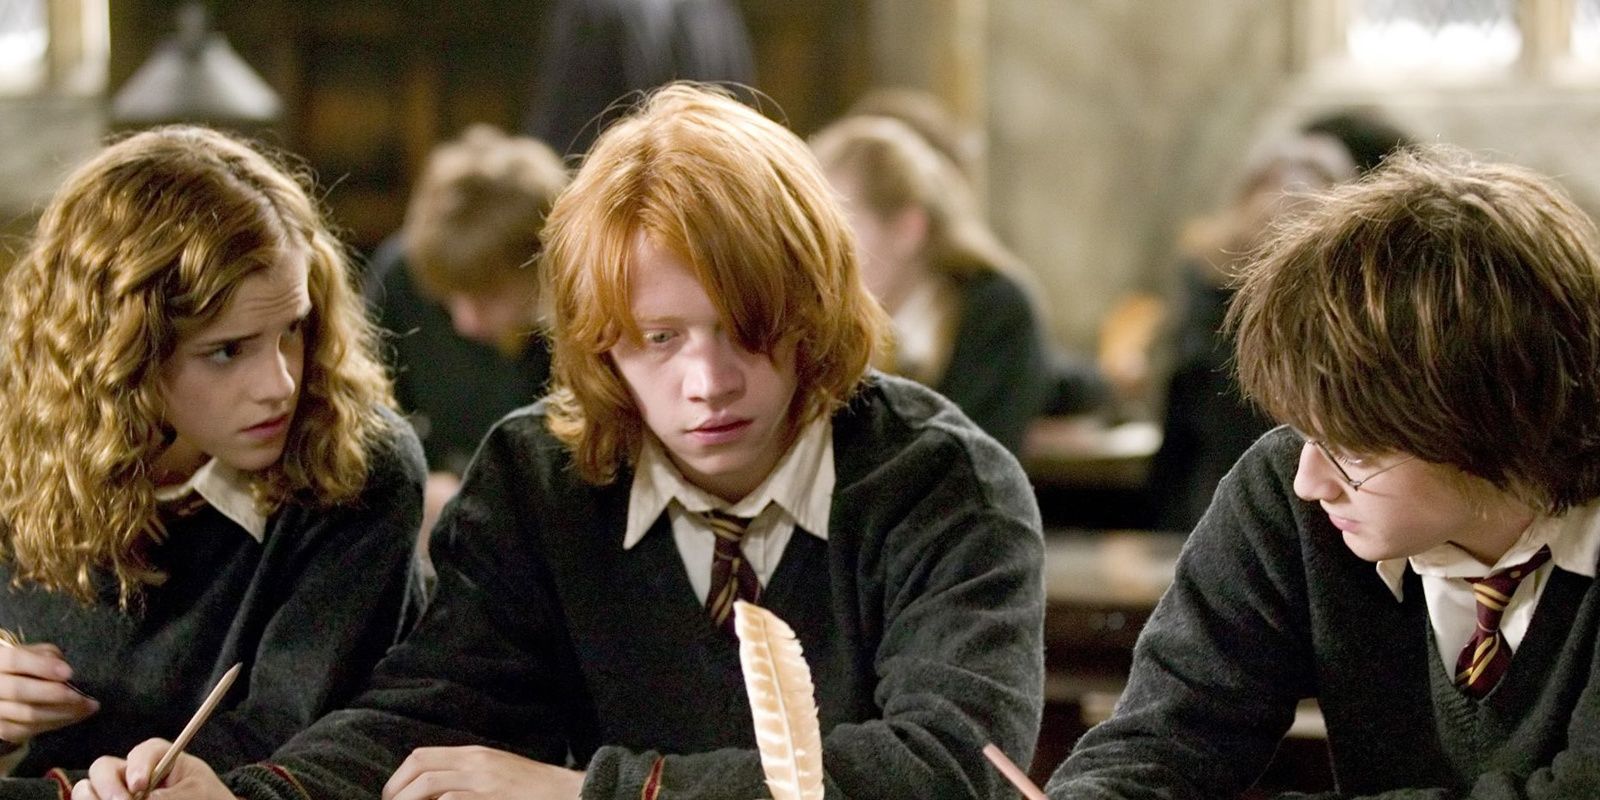 Ron Weasley and Harry Potter in Goblet of Fire